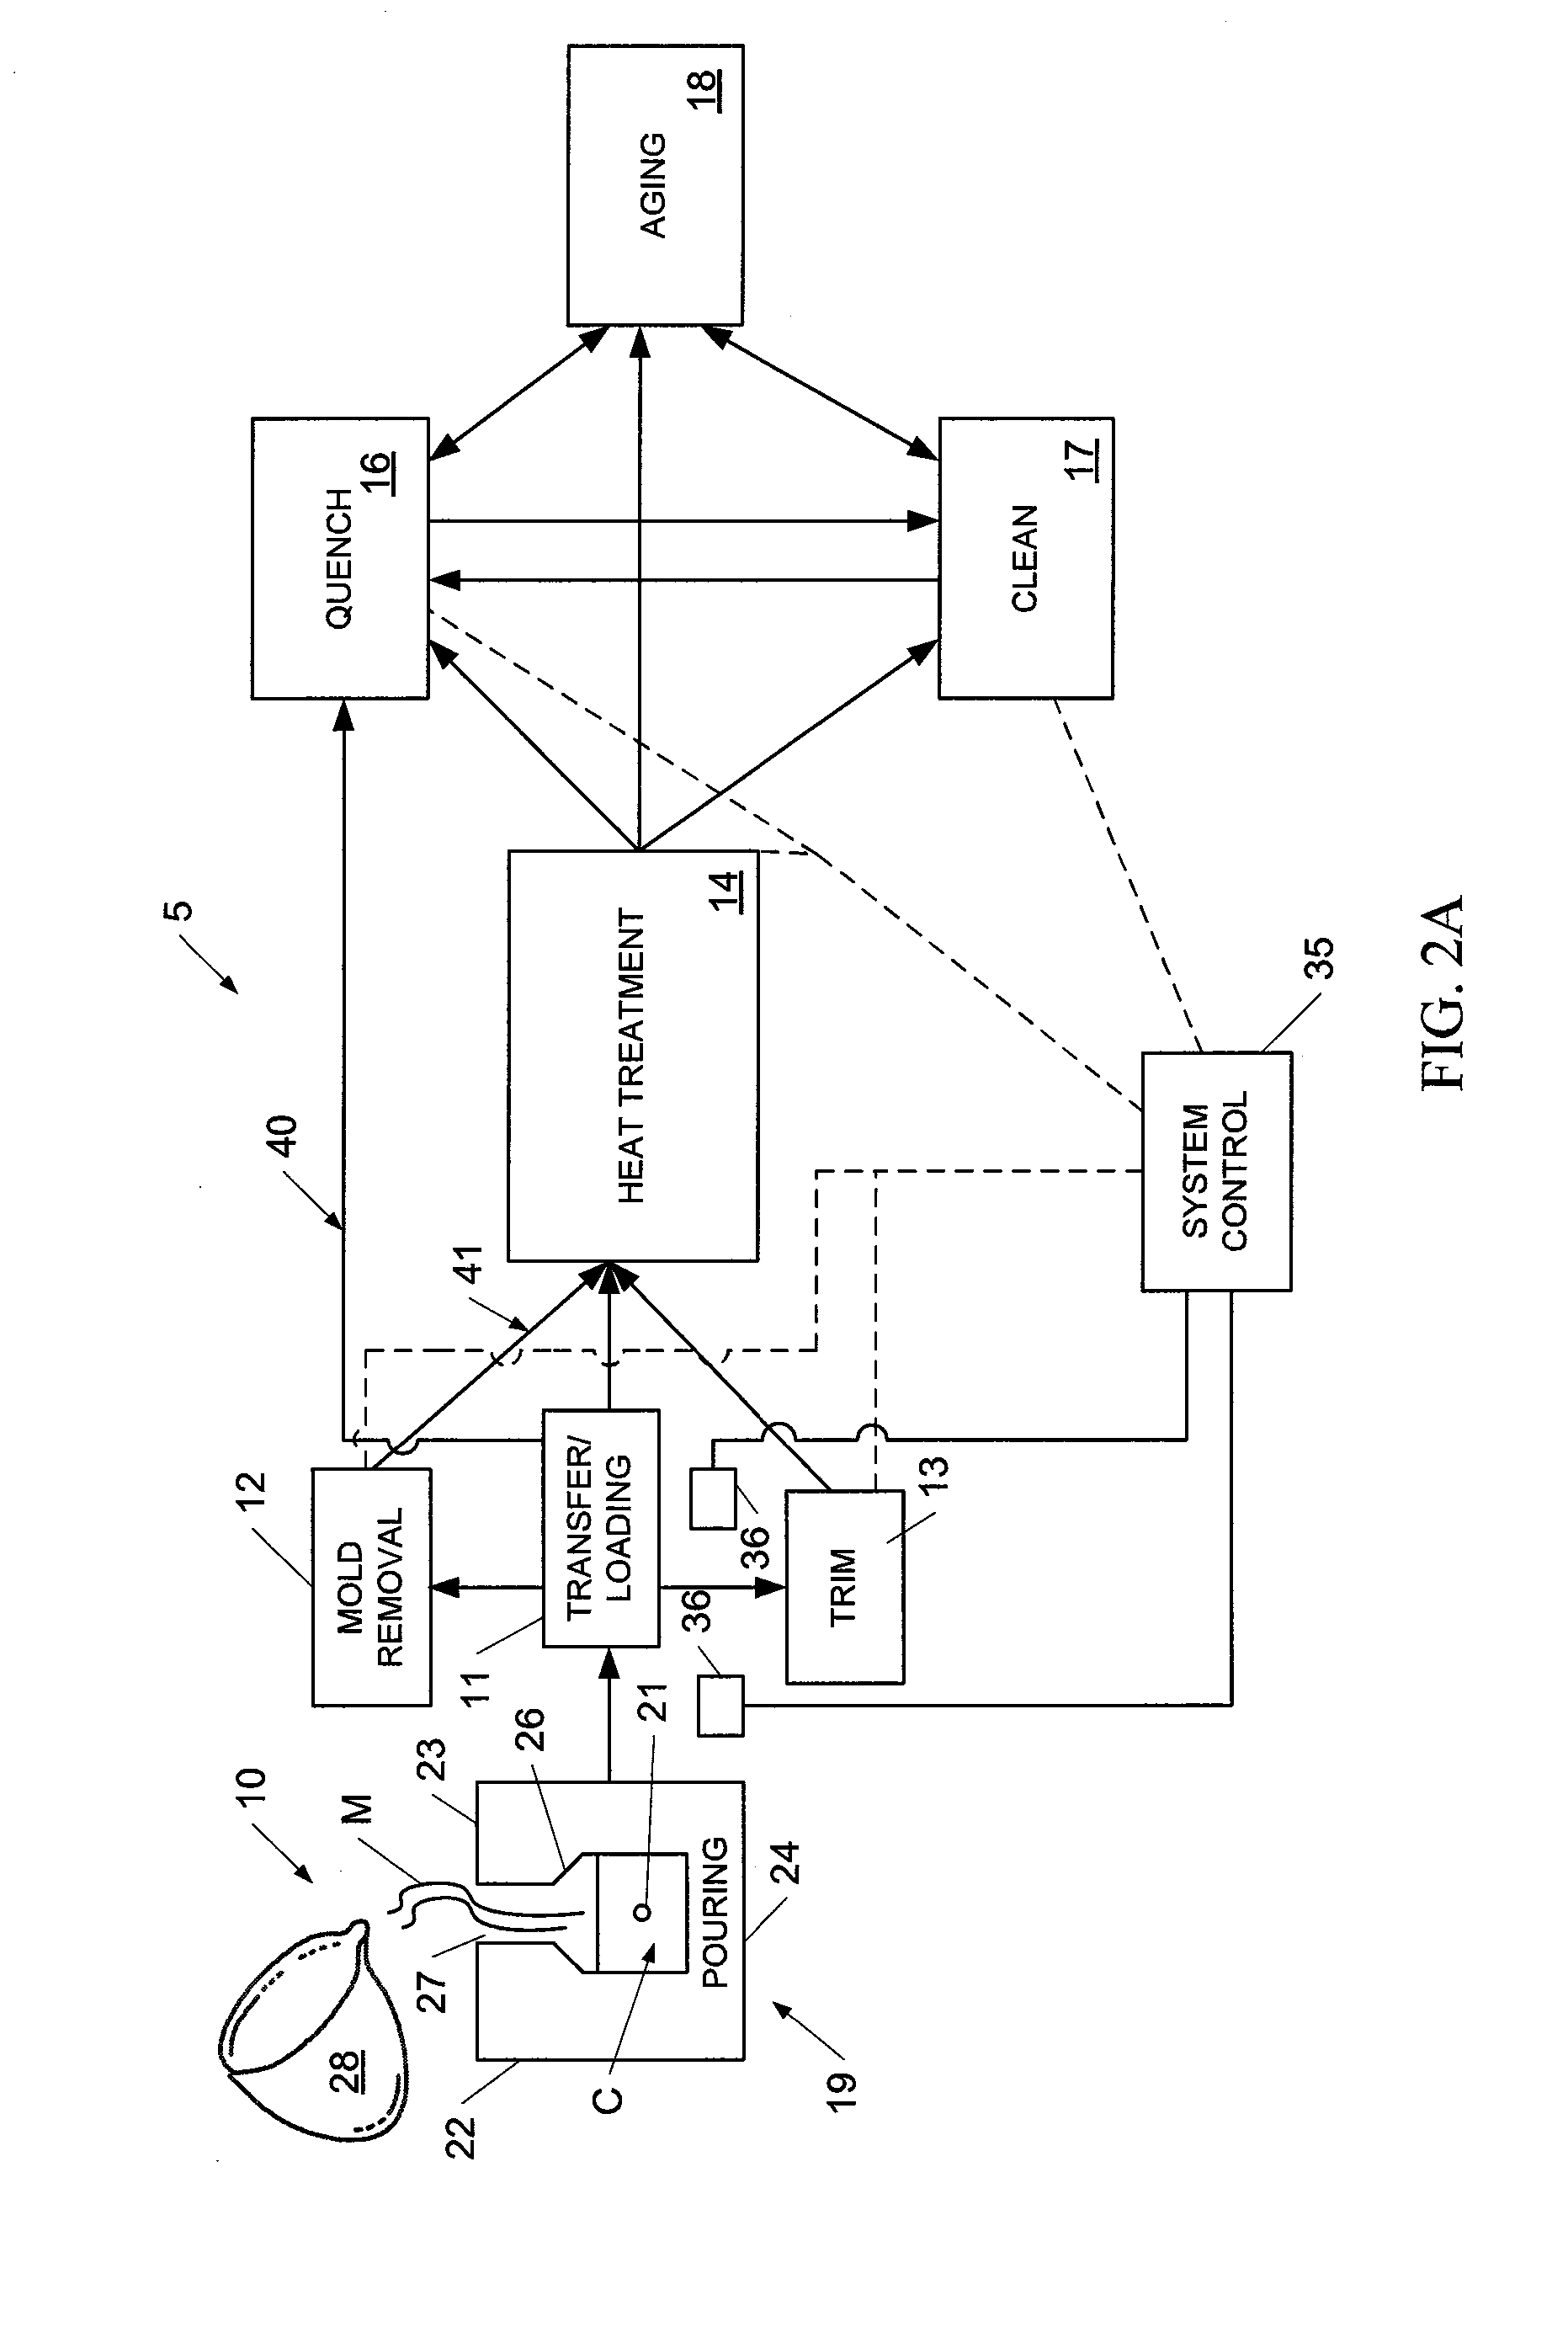 Methods and system for manufacturing castings utilizing an automated flexible manufacturing system